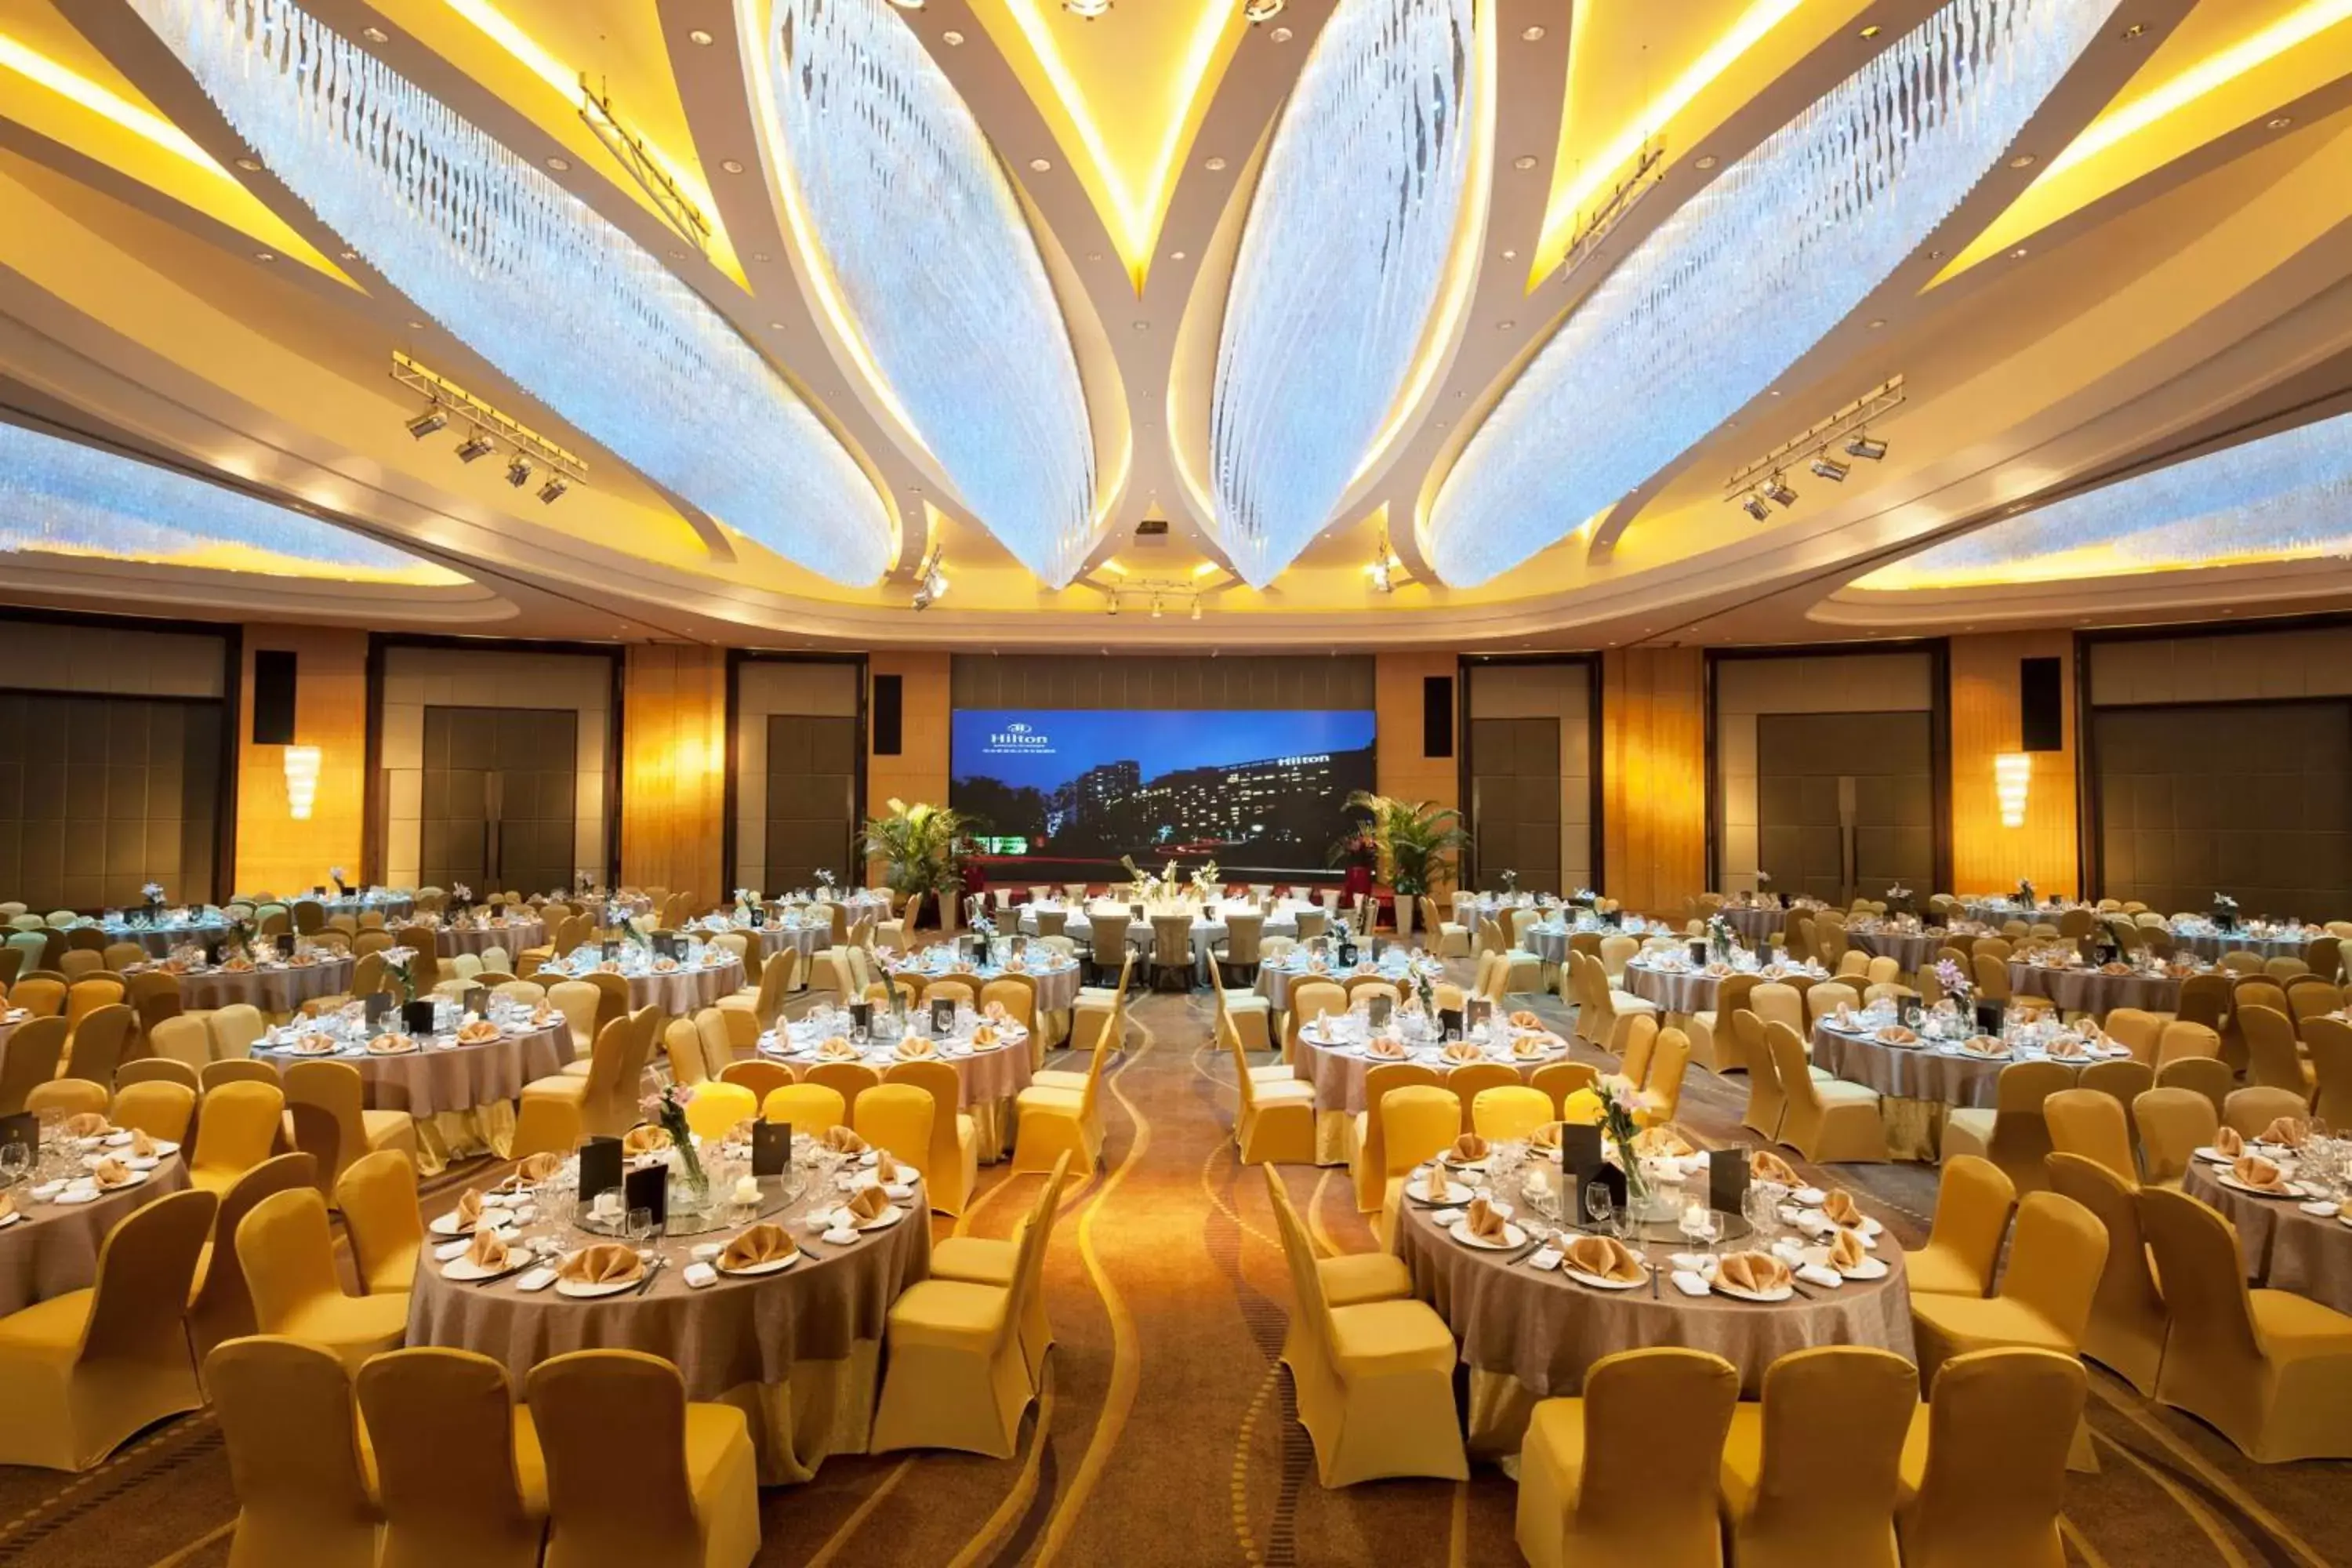 Meeting/conference room, Banquet Facilities in Hilton Nanjing Riverside